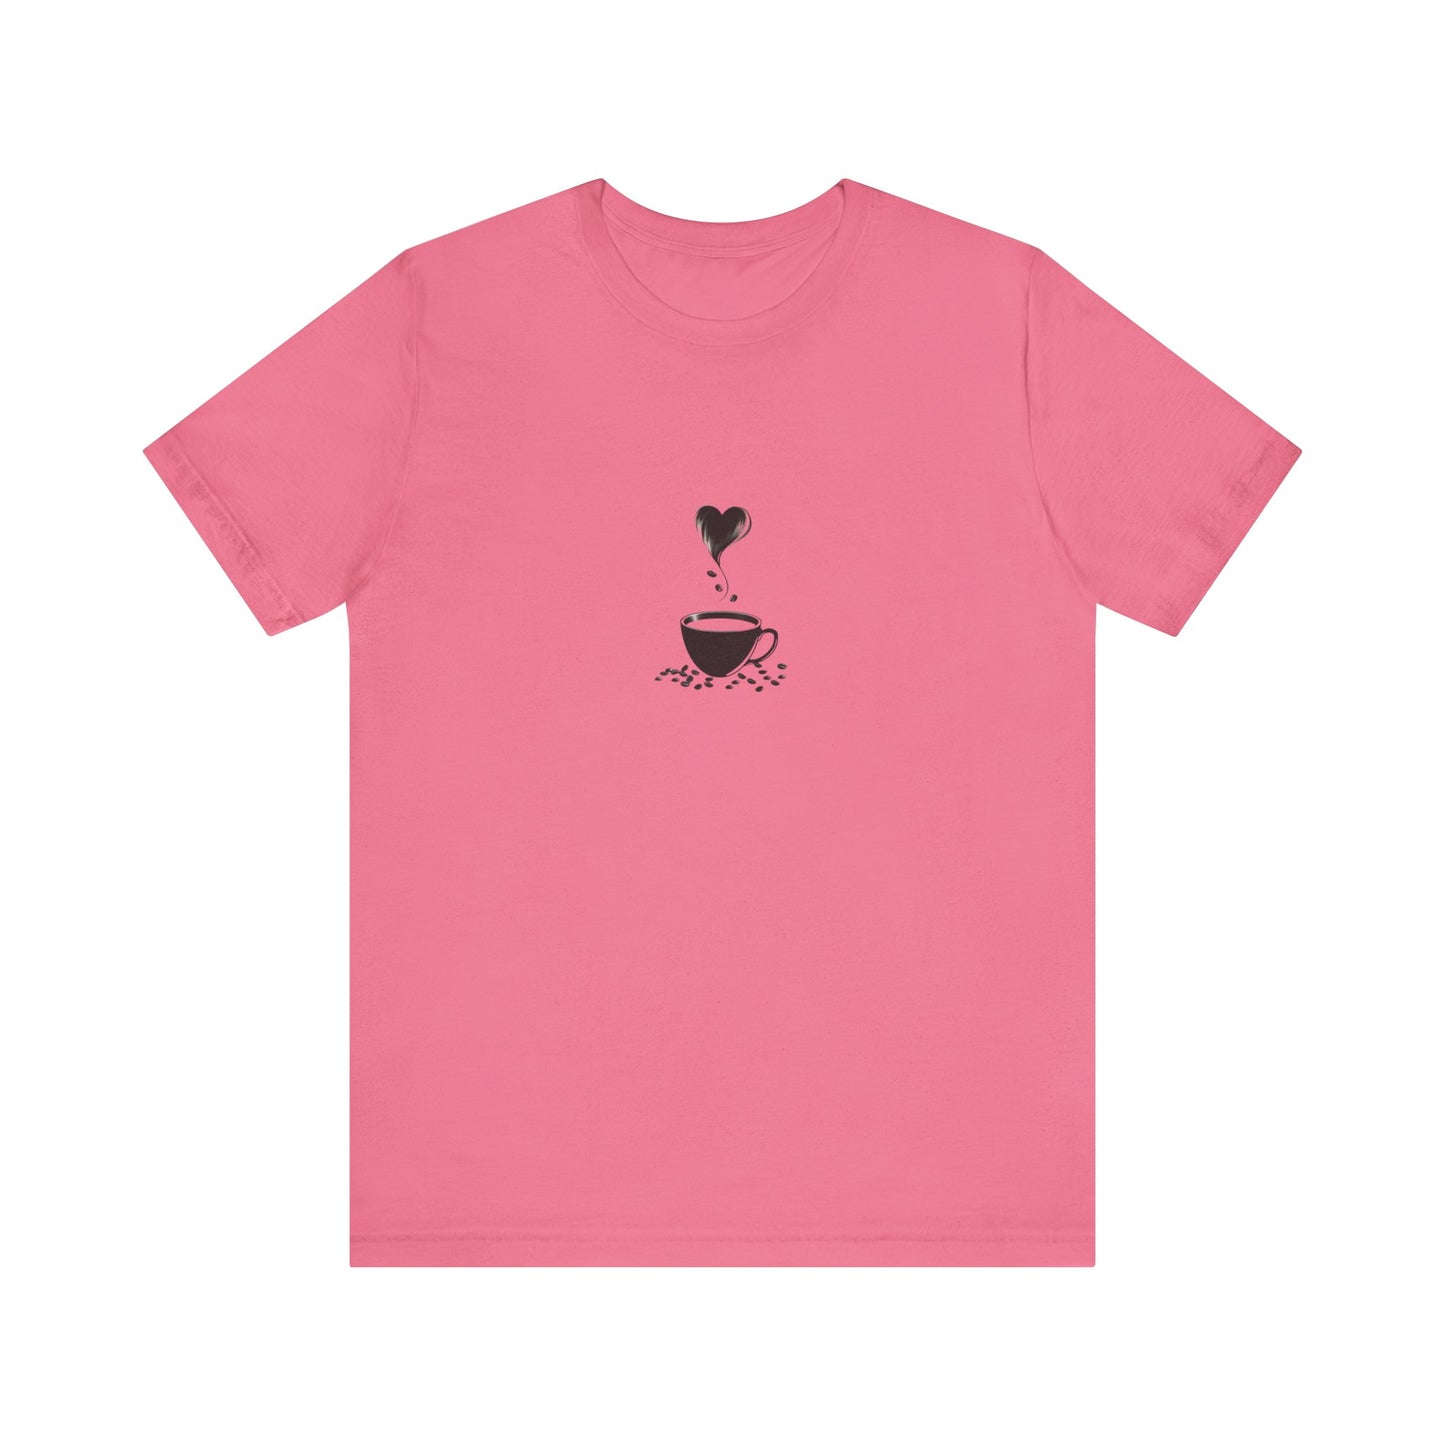 "Brewed Bliss" Unisex Jersey Tee - Comfort Meets Style - Butiful